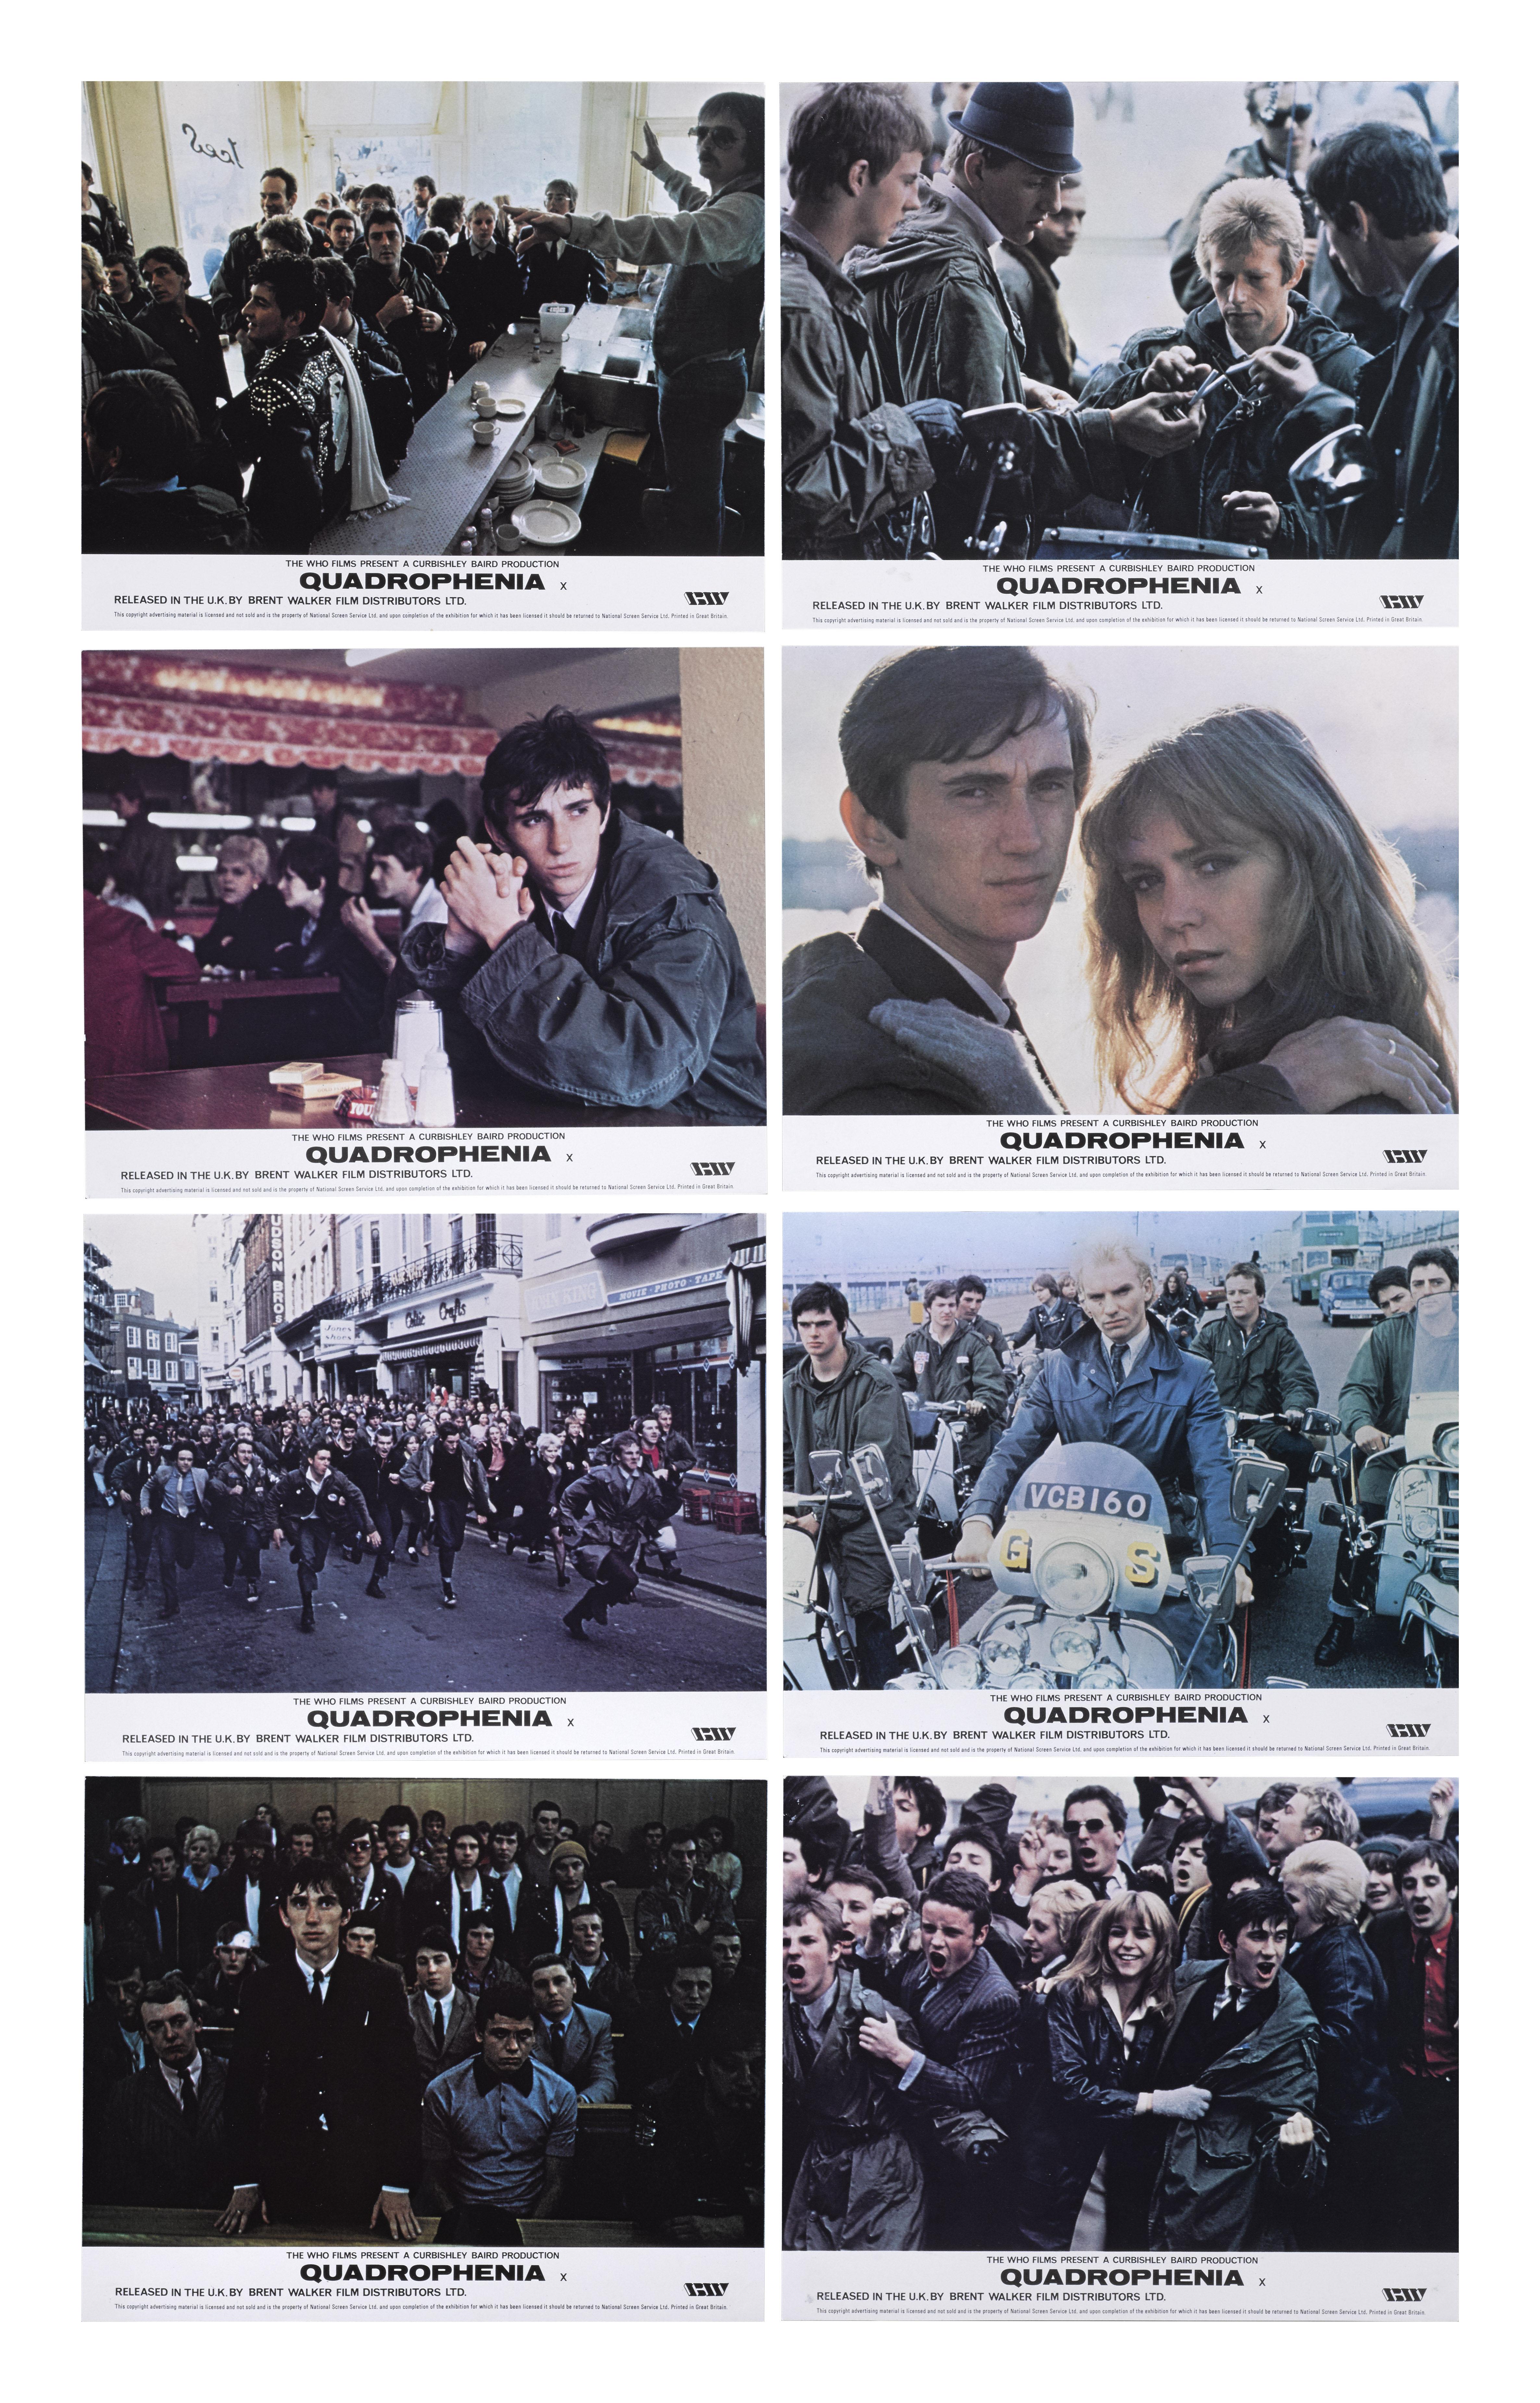 Original rear set of 8 British front of house stills for the 1979 film Quadrophenia.
This film was Franc Roddam's feature film Directional debut. It is set in 1964 and follows Jimmy (Phil Daniels), a mod from London, who breaks free from his boring